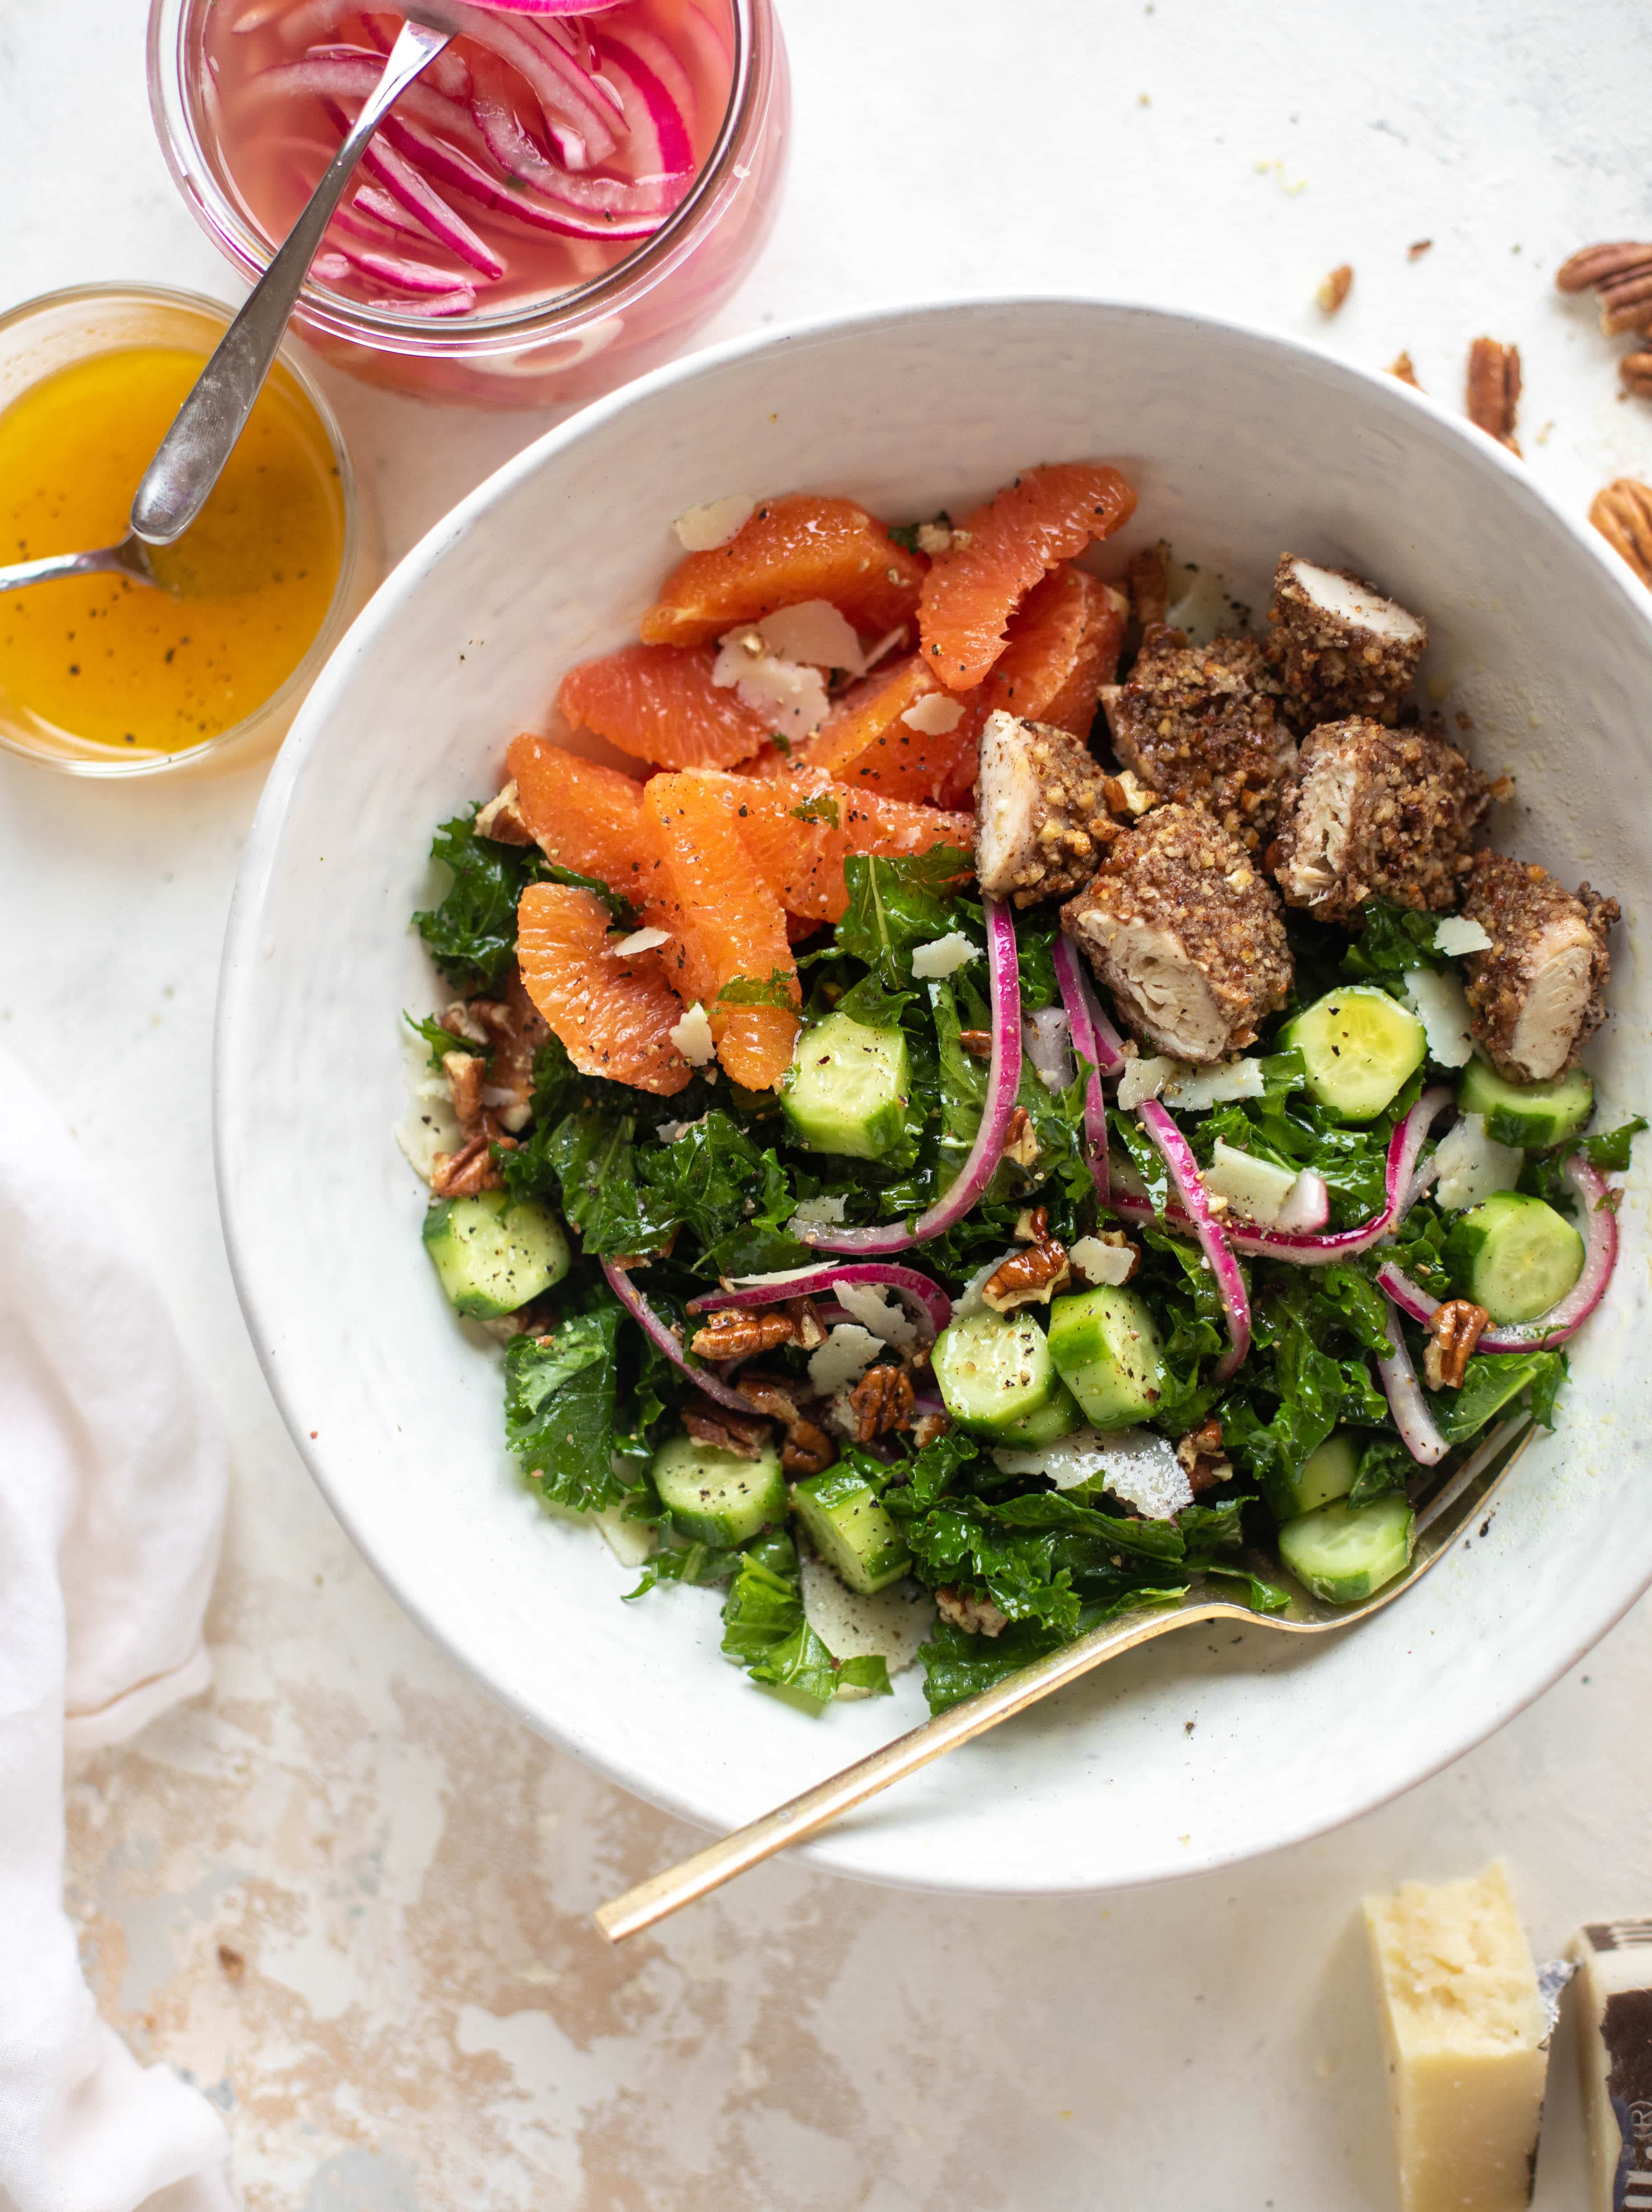 This pecan crusted chicken salad is so hearty! Kale, cara cara oranges, pickled onions, cucumbers and pecorino make this a bowl of flavor.